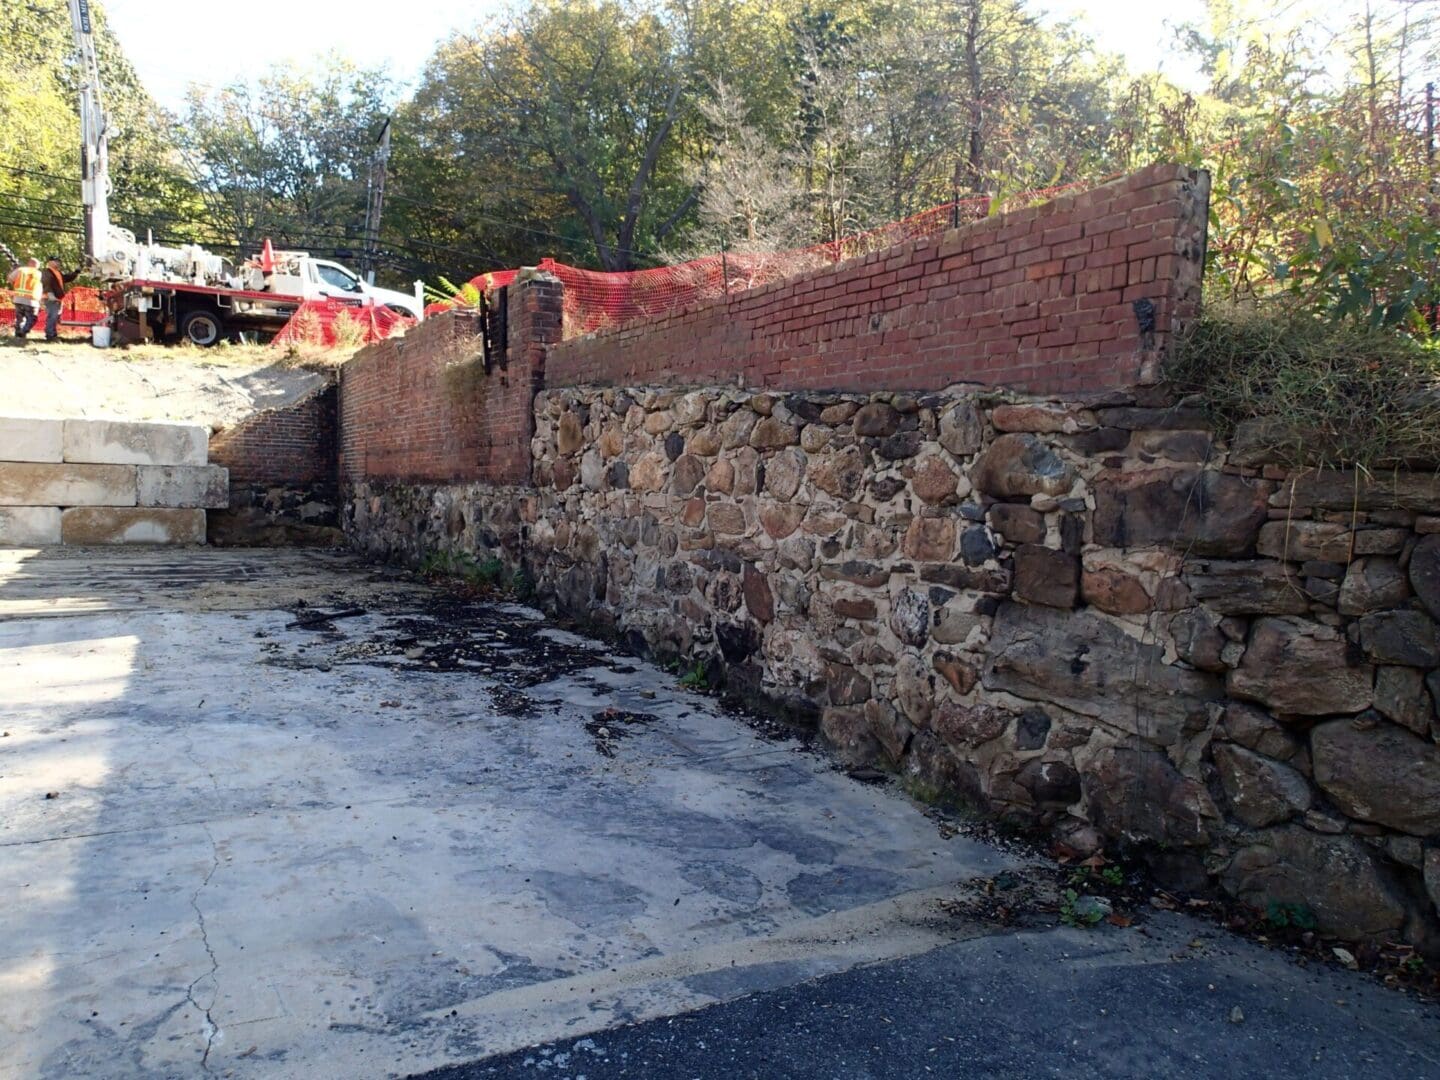 A brick wall with a concrete road in the foreground.